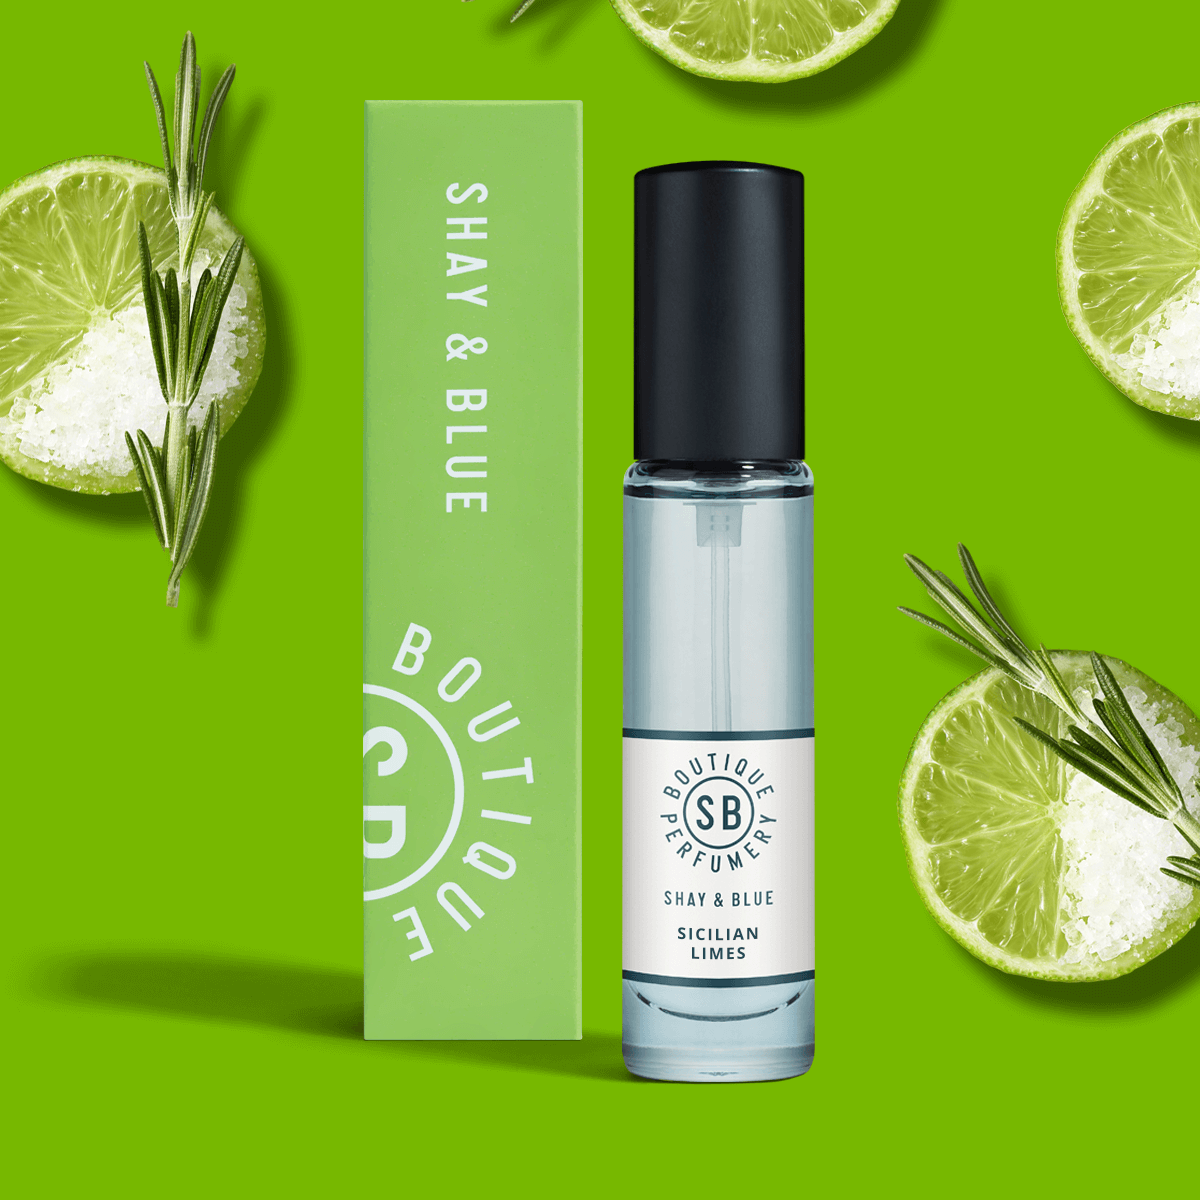 Sicilian Limes Fragrance 10ml | Tangy limes with a happy-hour hit of a salty margarita, rosemary and moss | Clean All Gender Fragrance | Shay & Blue